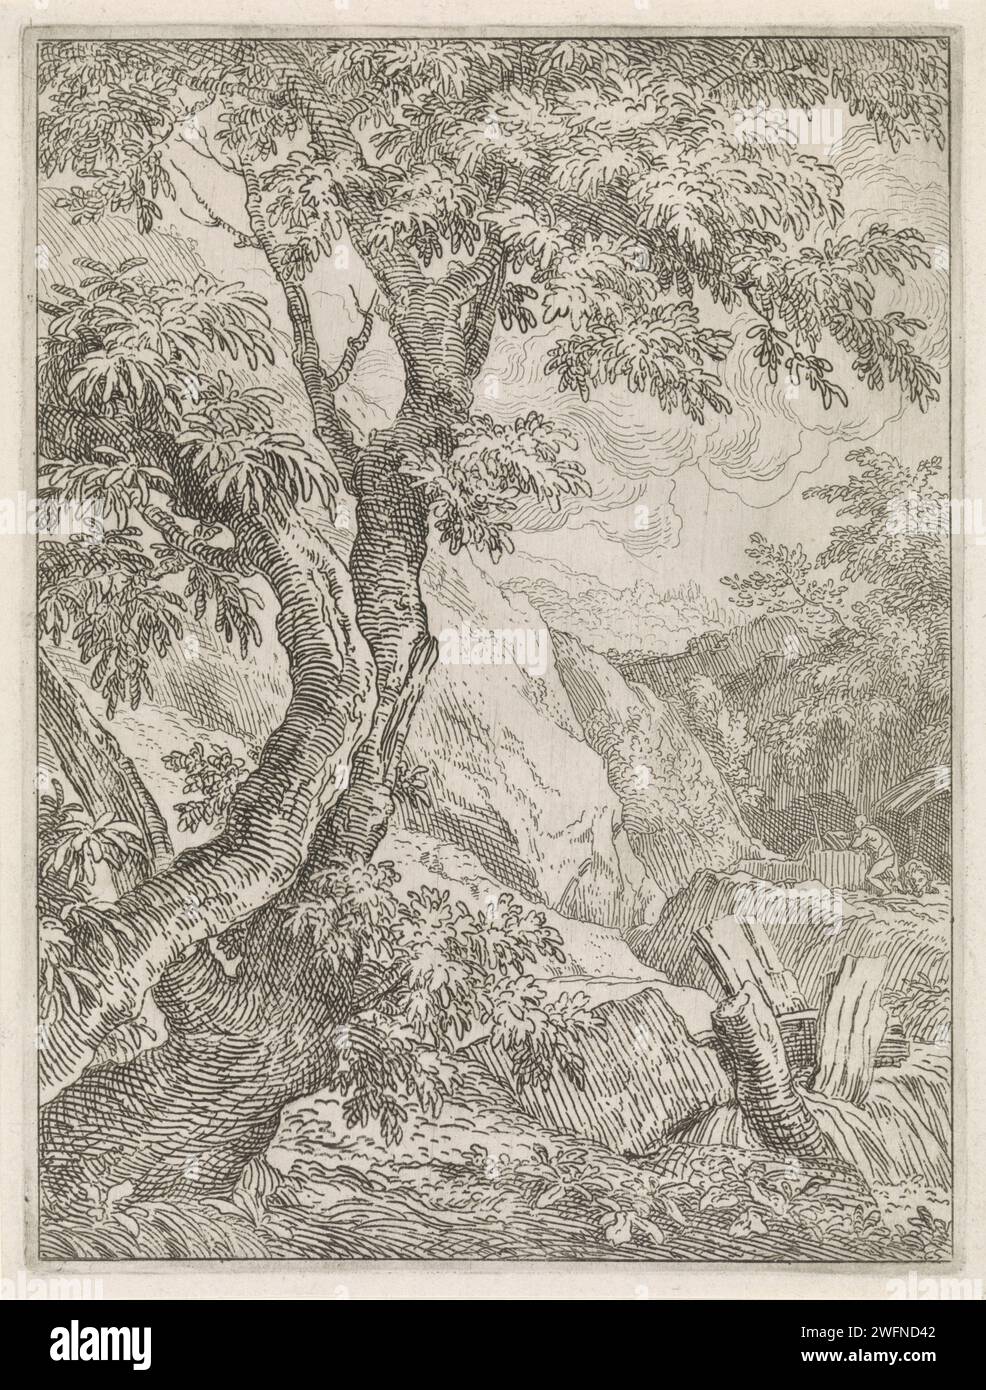 Landscape with Saint Hieronymus, Abraham Genoels, 1650 - 1723 print A landscape with a large tree in the foreground. In the background on the right a cave with the kneeling hieronymus. Next to him his lion. Rome (possibly) paper etching forest, wood. St. Jerome as hermit in a landscape, reading Stock Photo